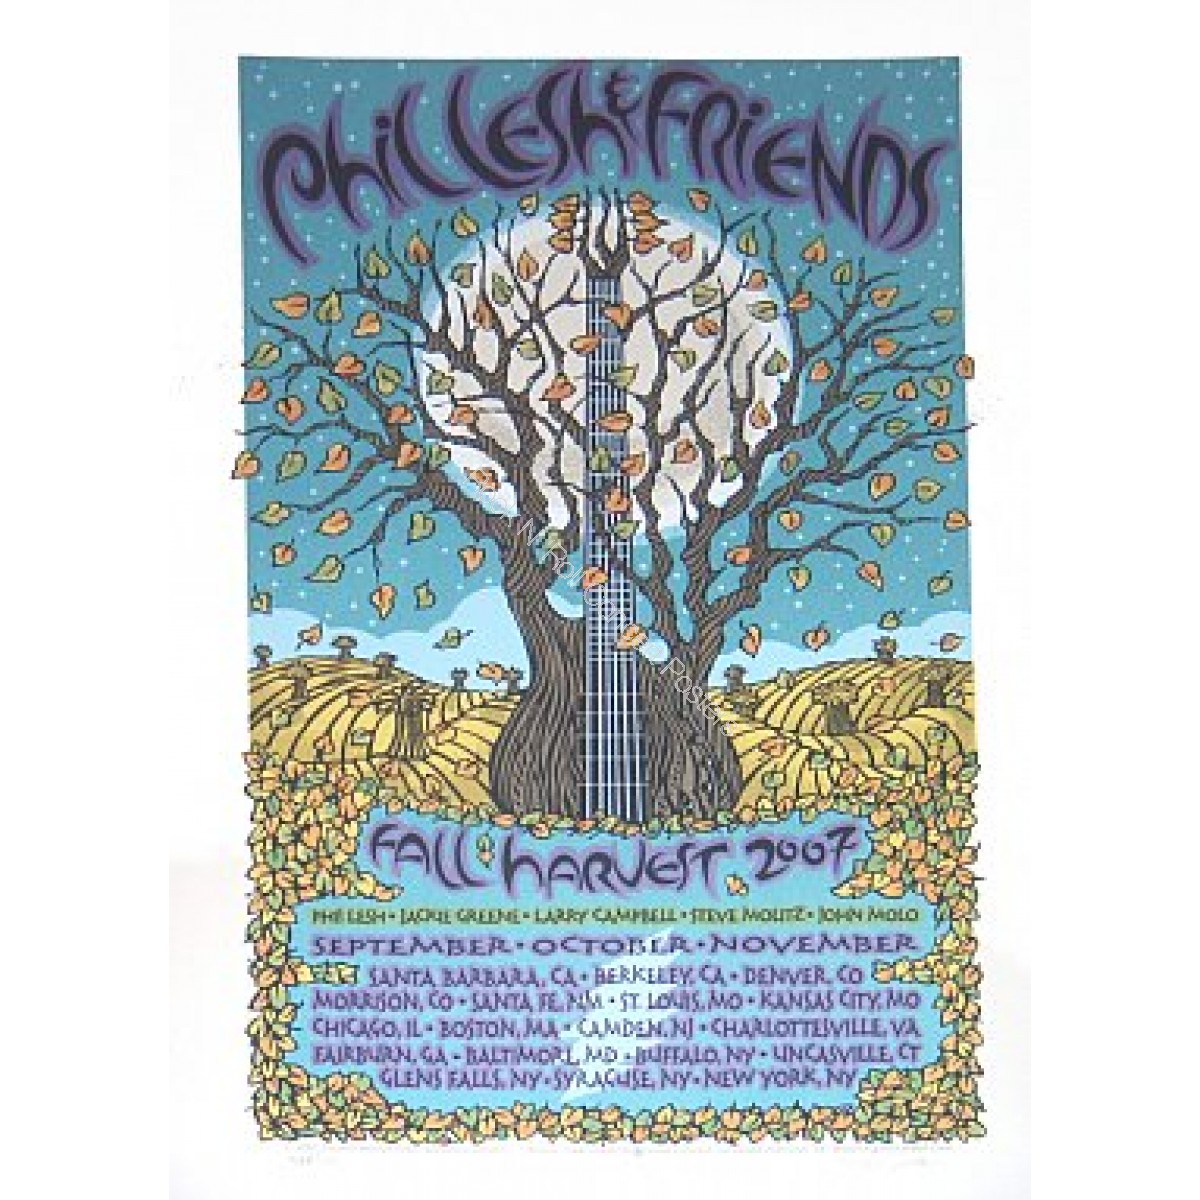 Phil Lesh & Friends "Fall Harvest 07" Fall Tour 2007 Official Silk Screen Poster S/N LE of 775